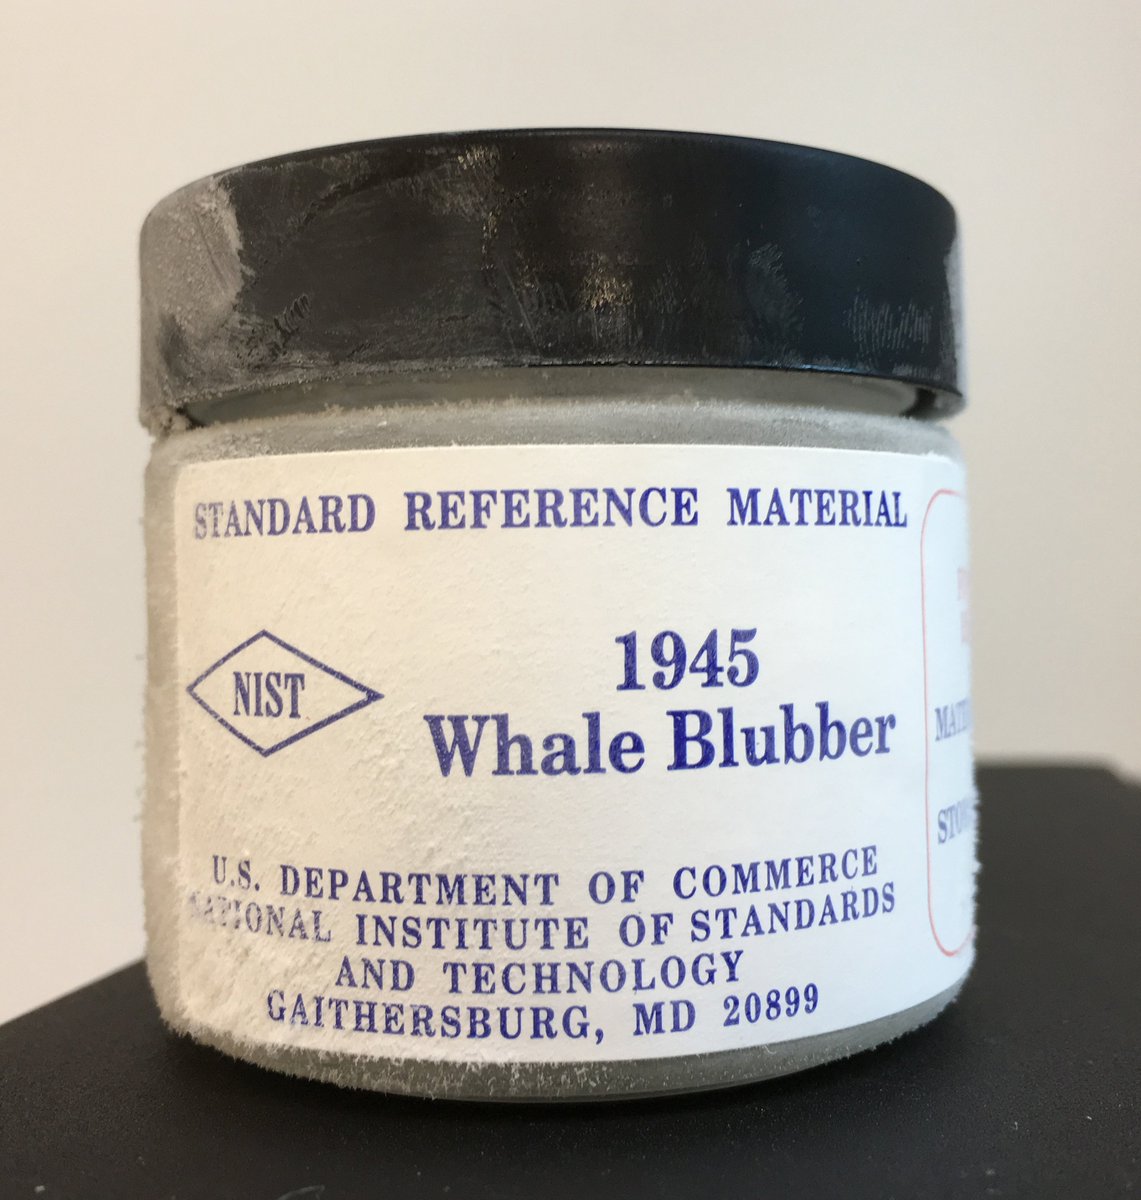 it'll go well with your...uhhh...whale blubber